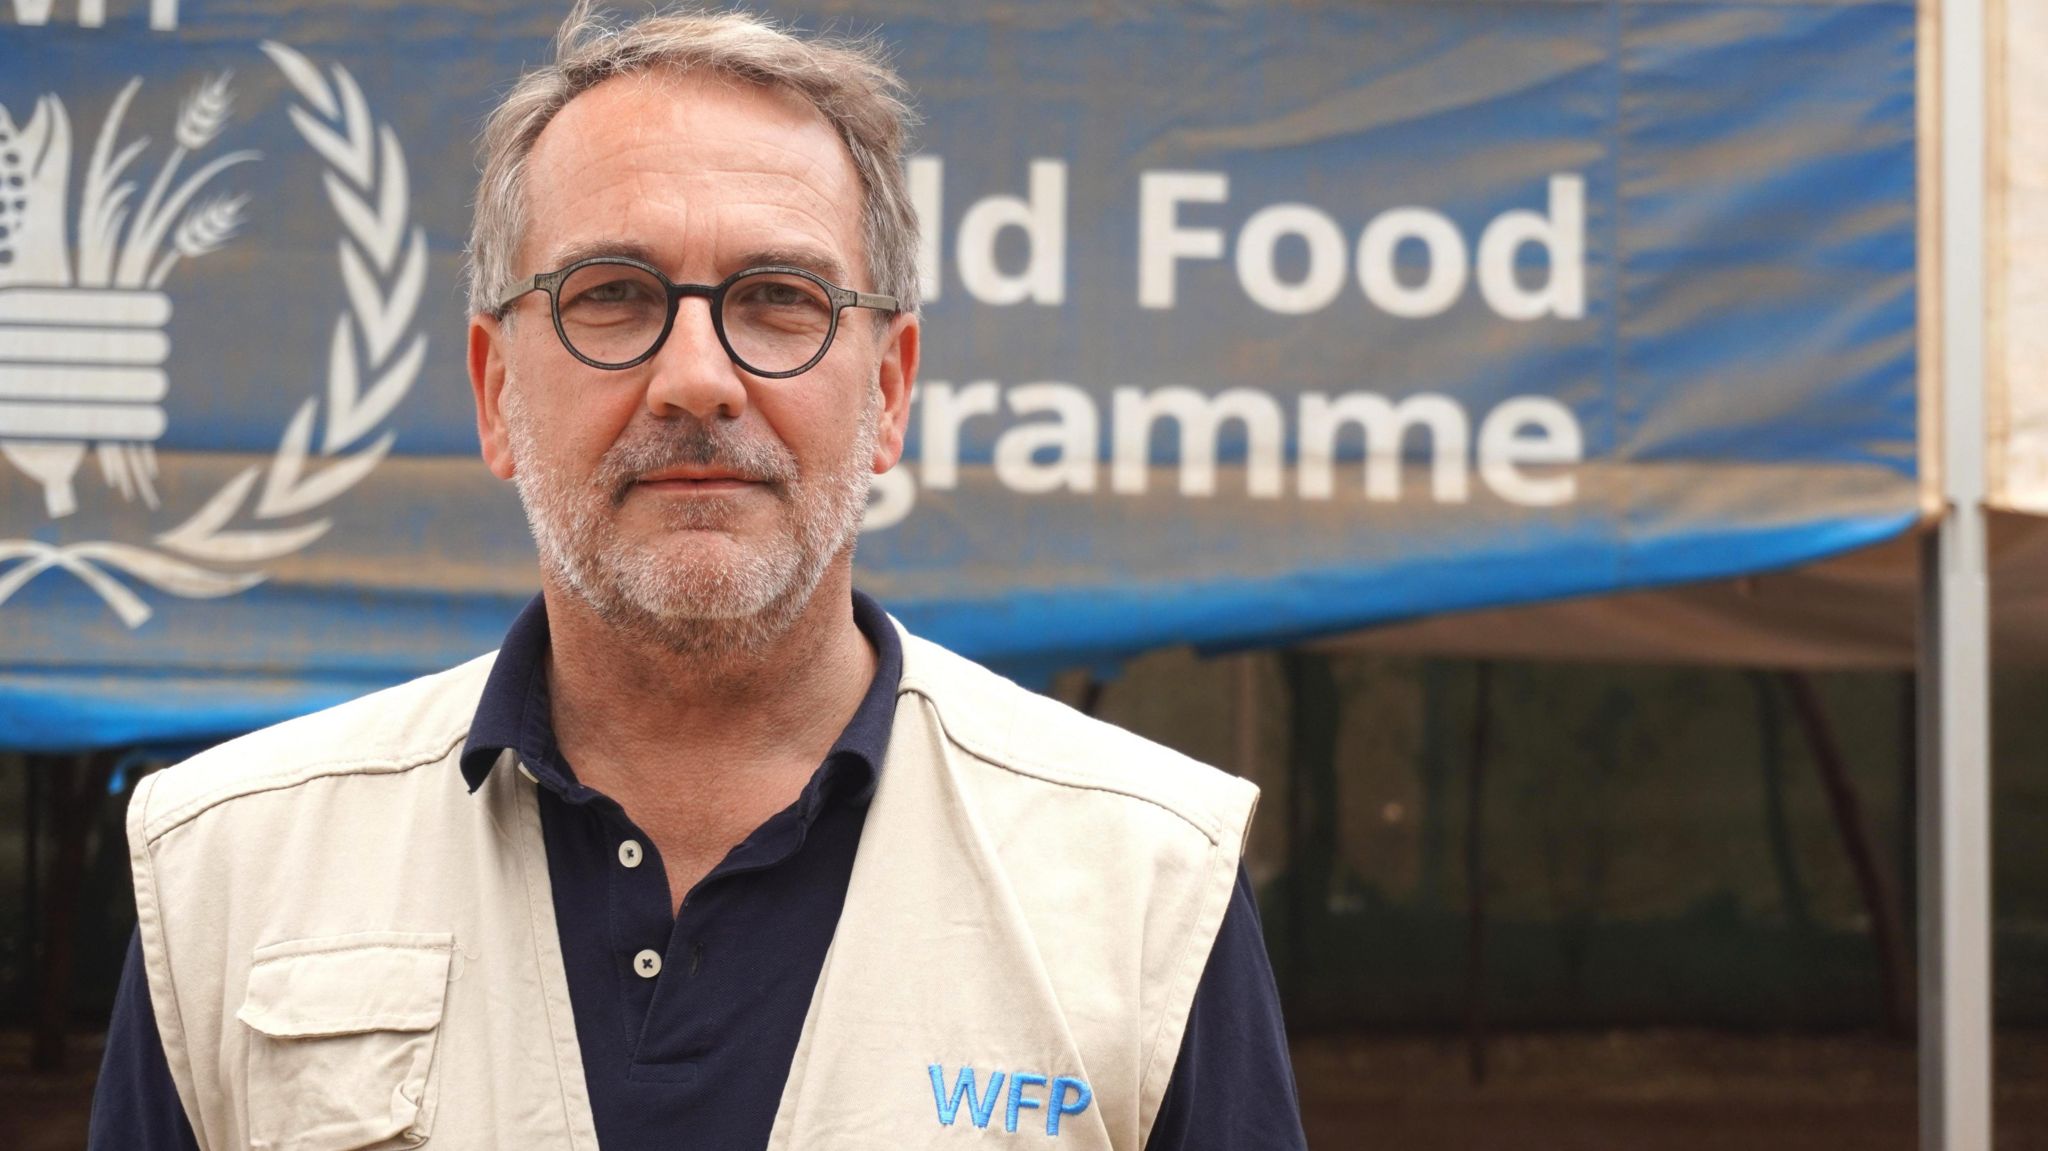 Martin Frick, director of the World Food Programme's global office in Berlin, Germany.